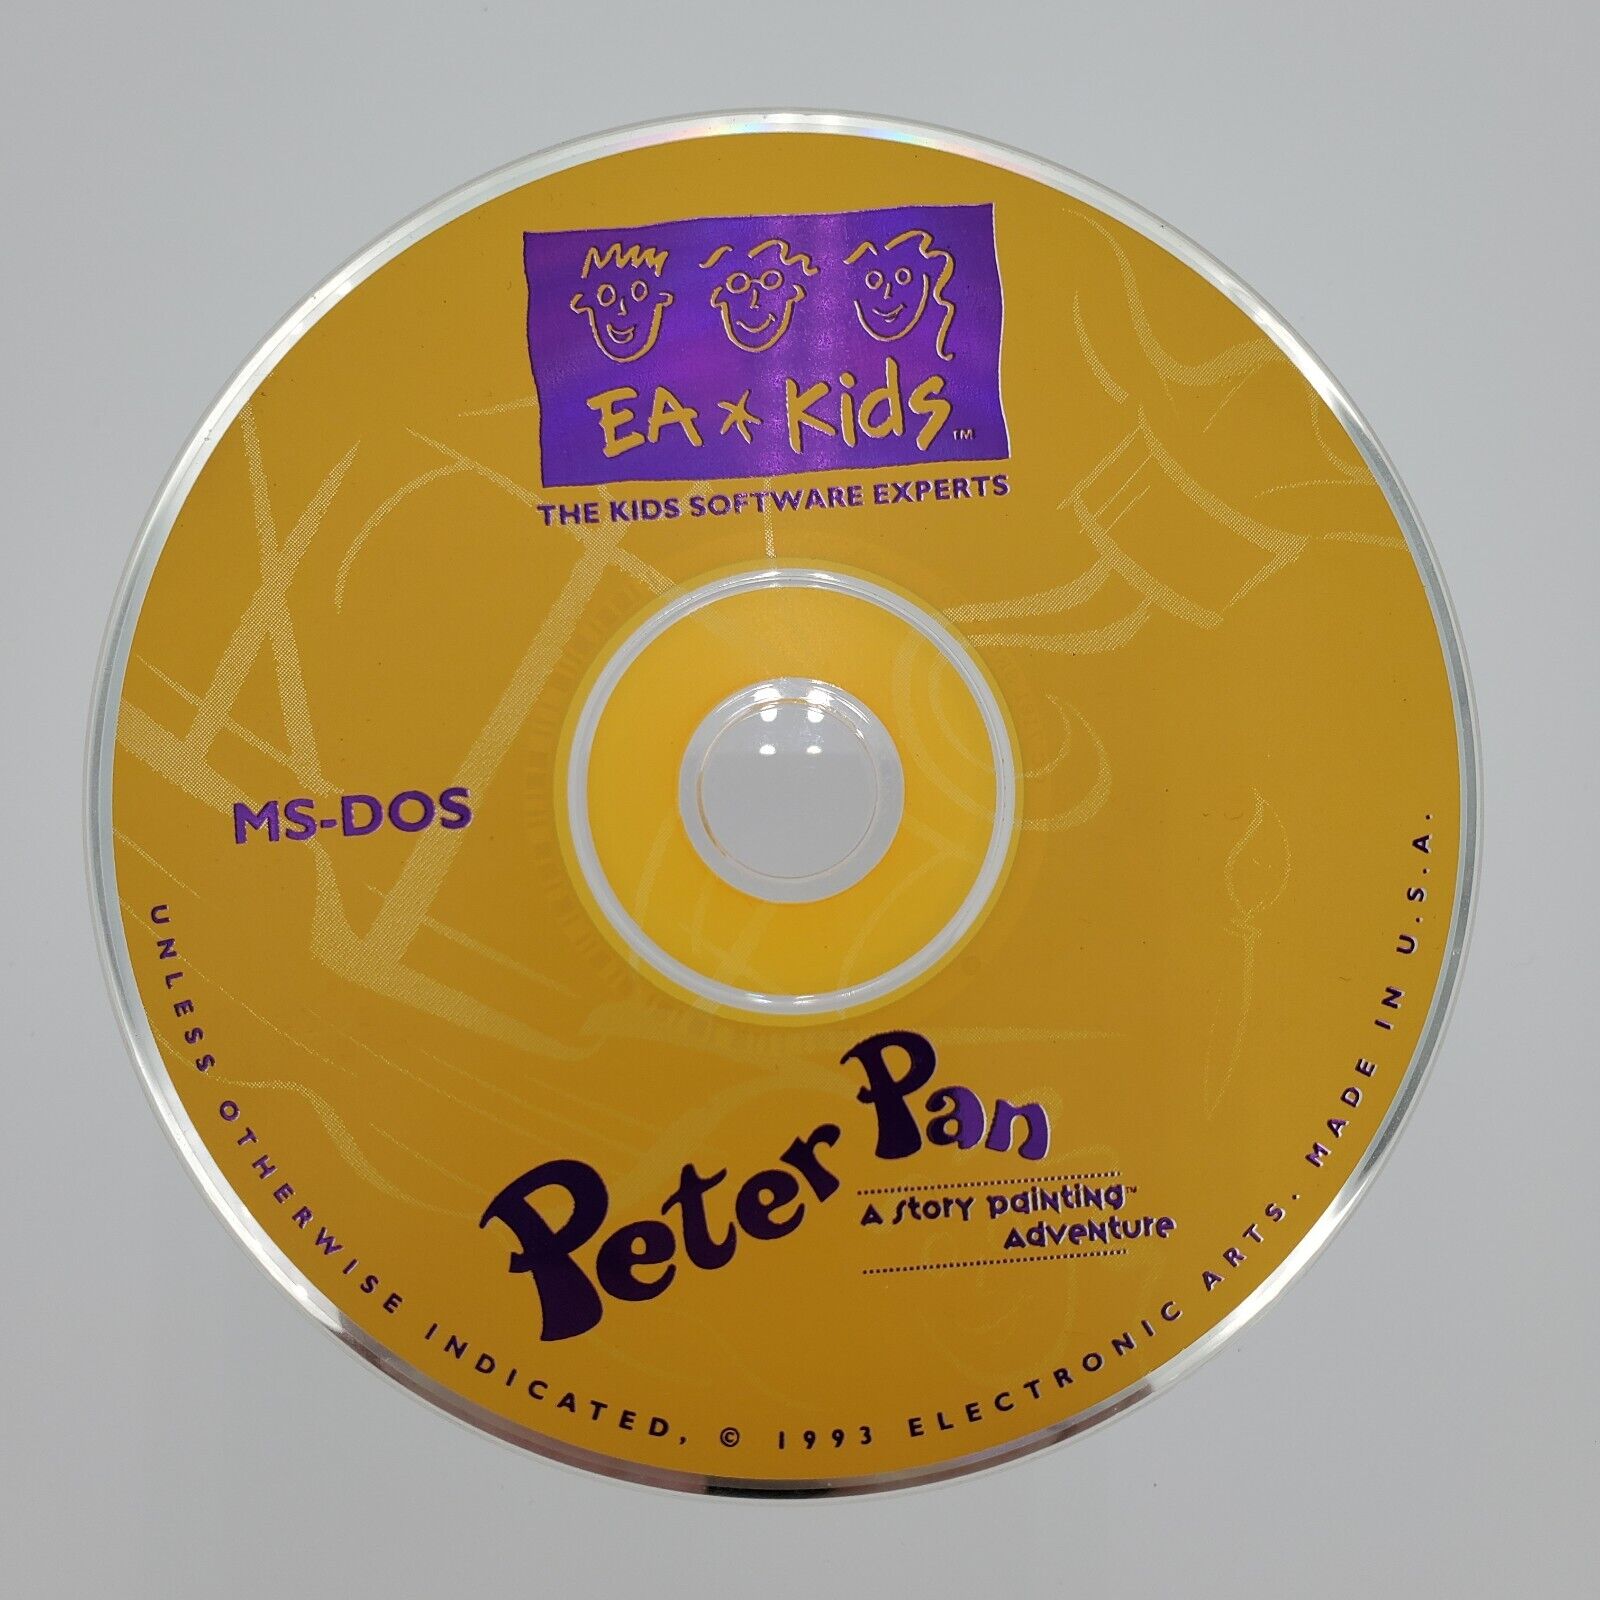 Peter Pan A Story Painting Adventure CD-ROM 1993 Rare MS-DOS EA Kids